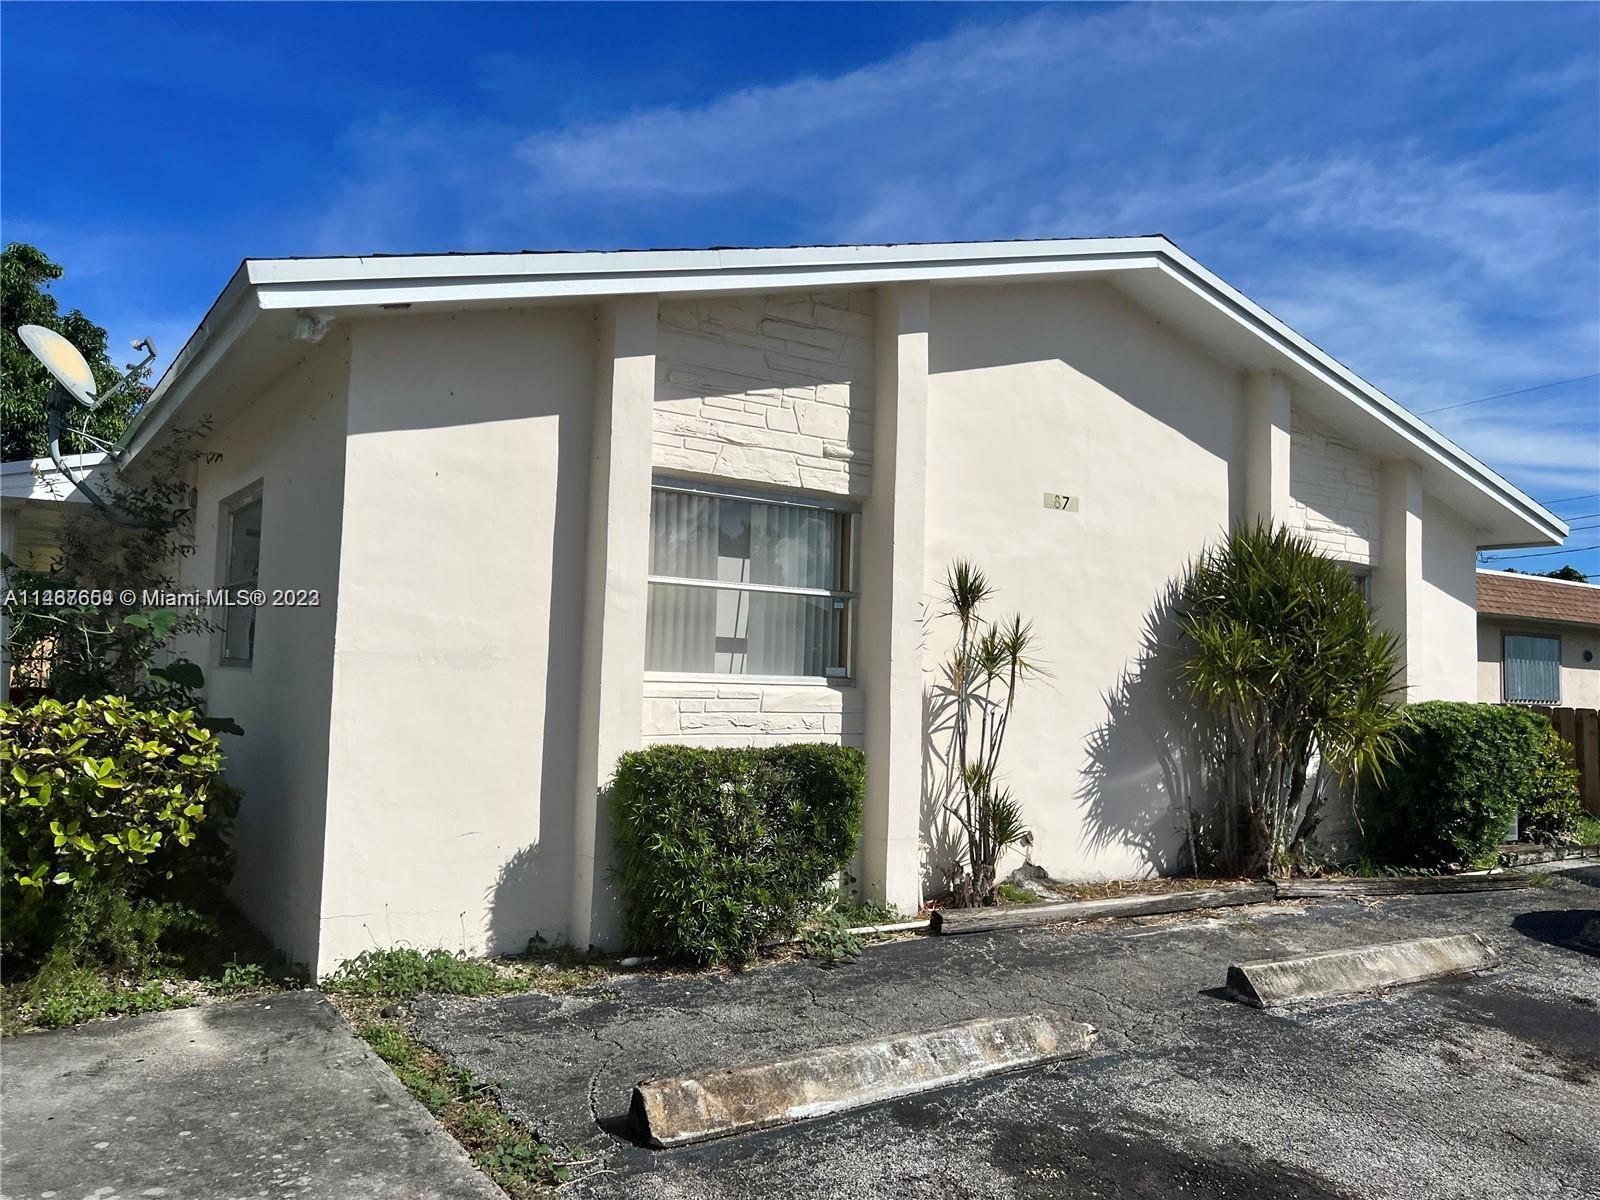 Photo of 1870 NW 59th Ave #1 in Sunrise, FL